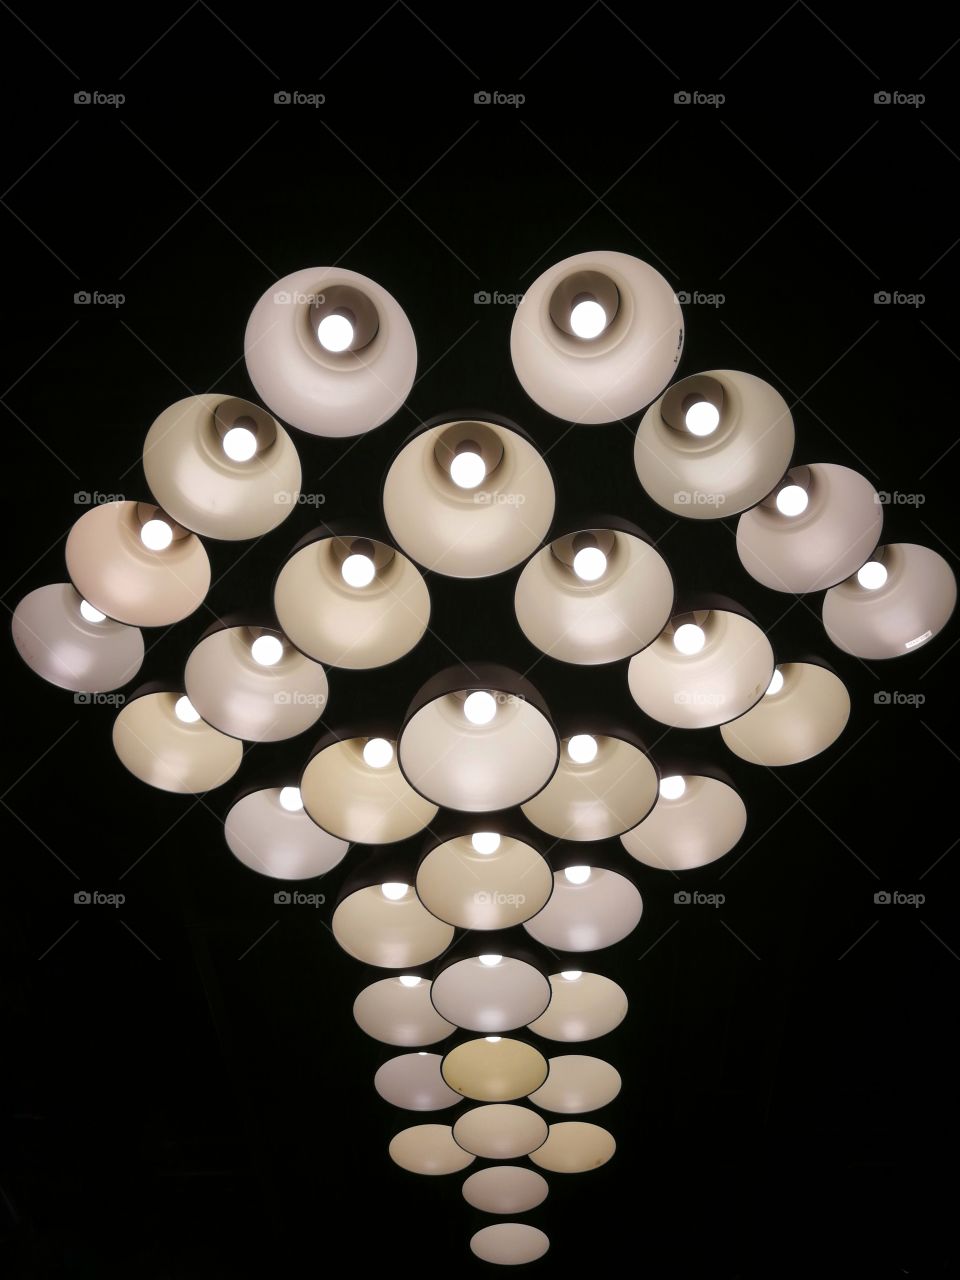 abstract group pattern of modern round lamps with black background